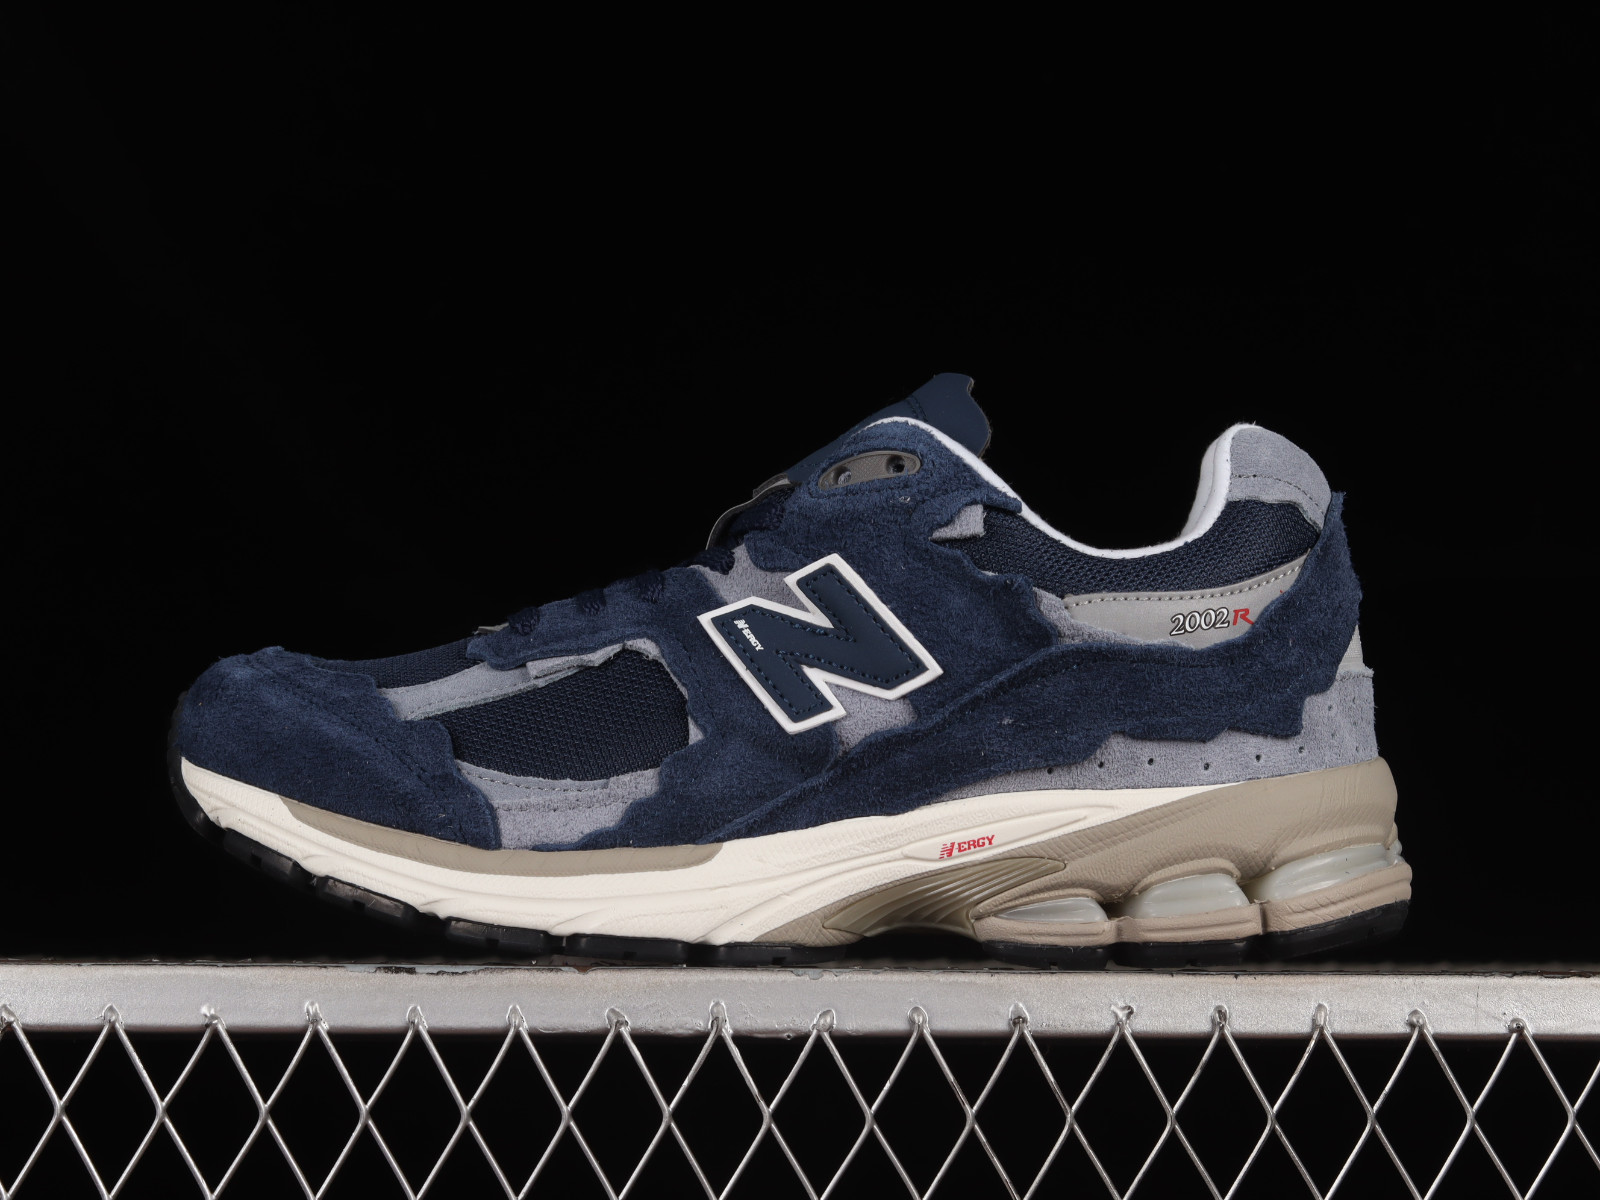 New Balance 2002R Protection Pack Navy Grey - MultiscaleconsultingShops